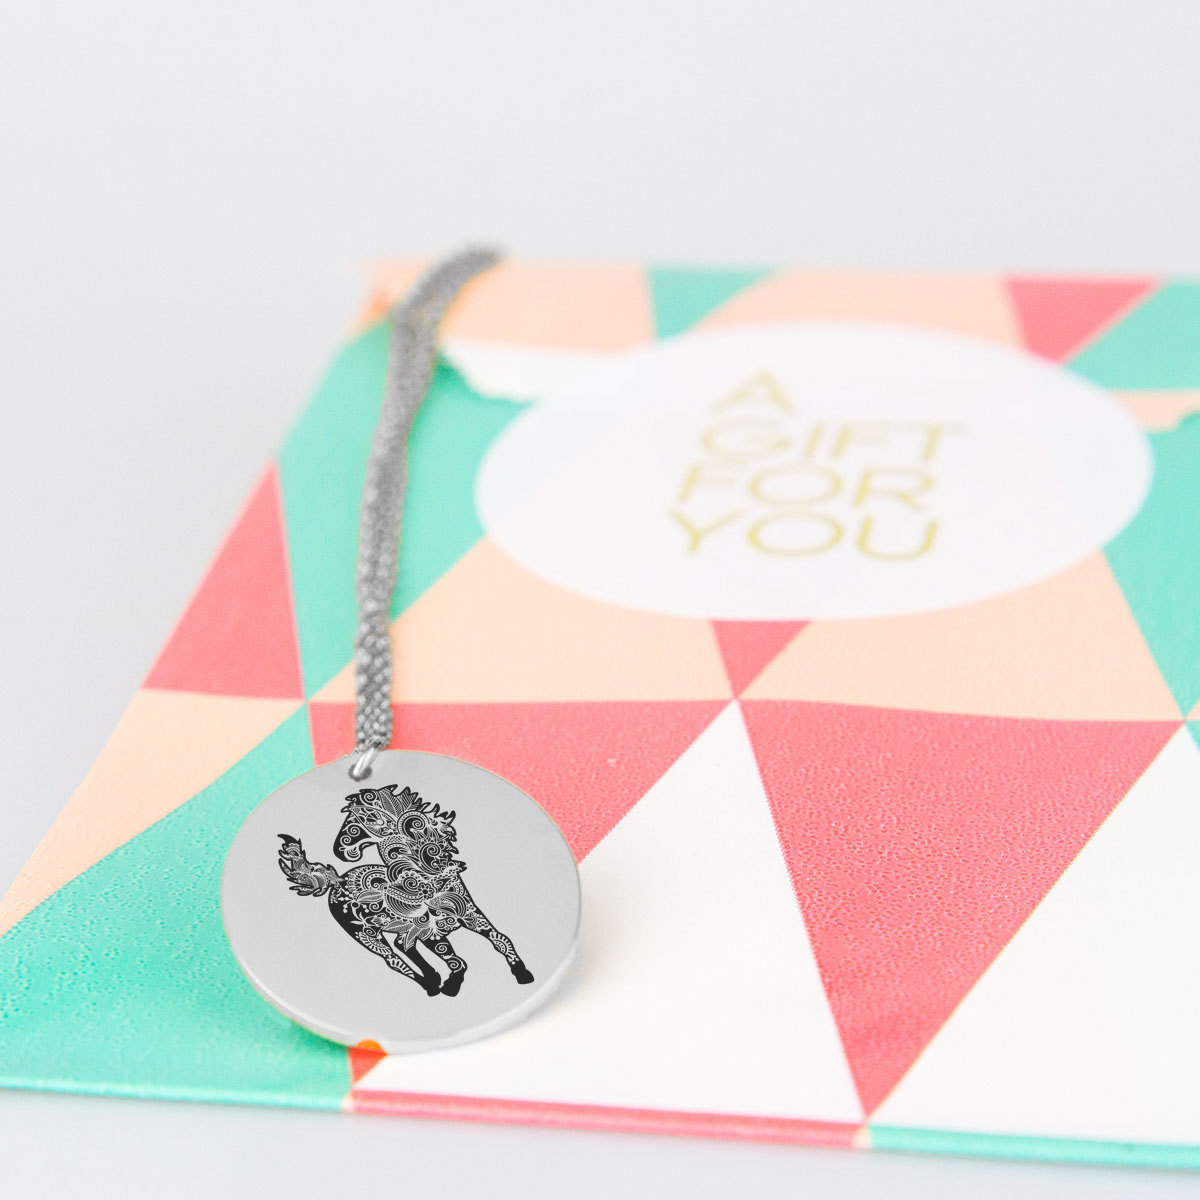 Superior Turtle Charm Necklace